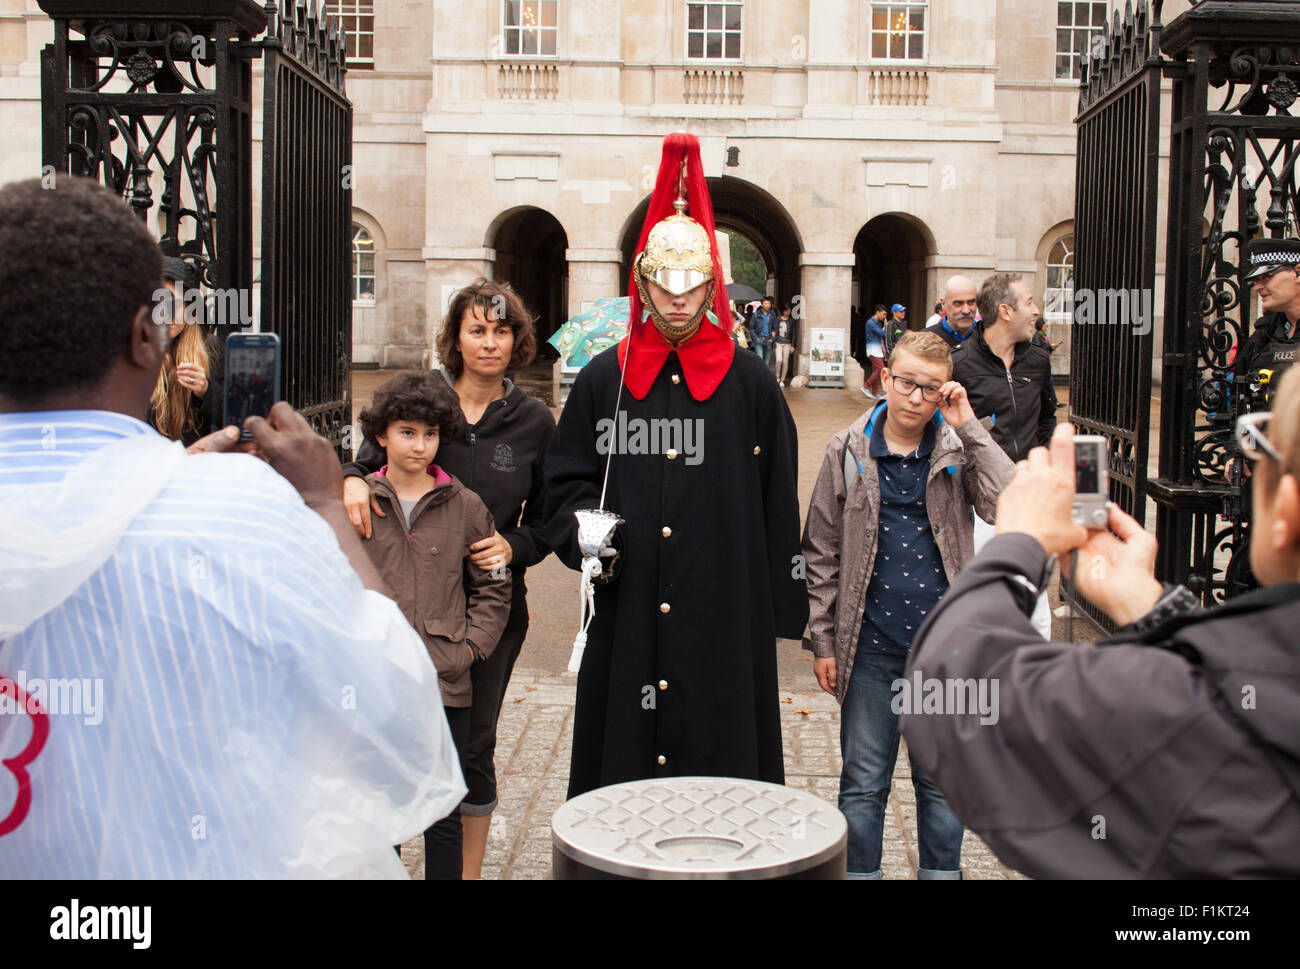 Tourists taking picture with Life Guard Trooper , Whitehall, London,UK Stock Photo